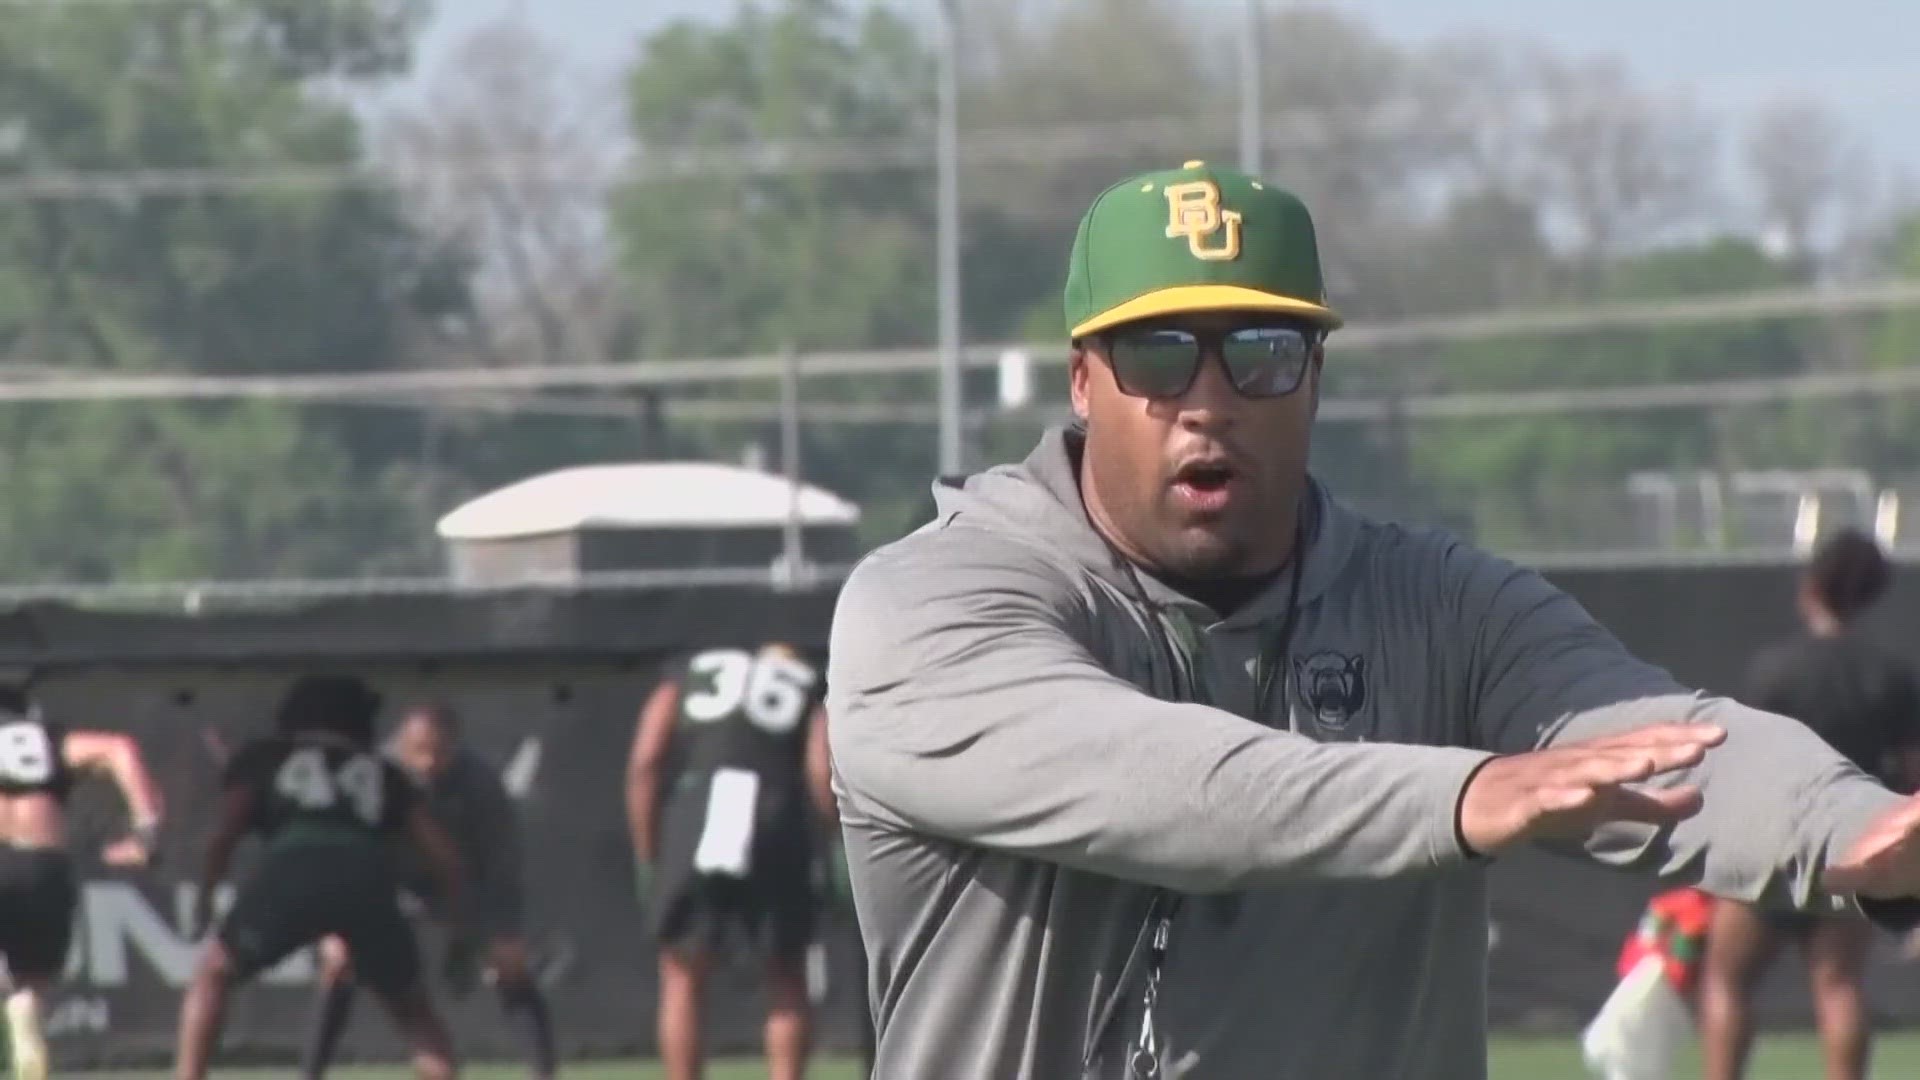 The former Baylor Bears assistant will be heading to Lawrence as an analyst for the Jayhawks.